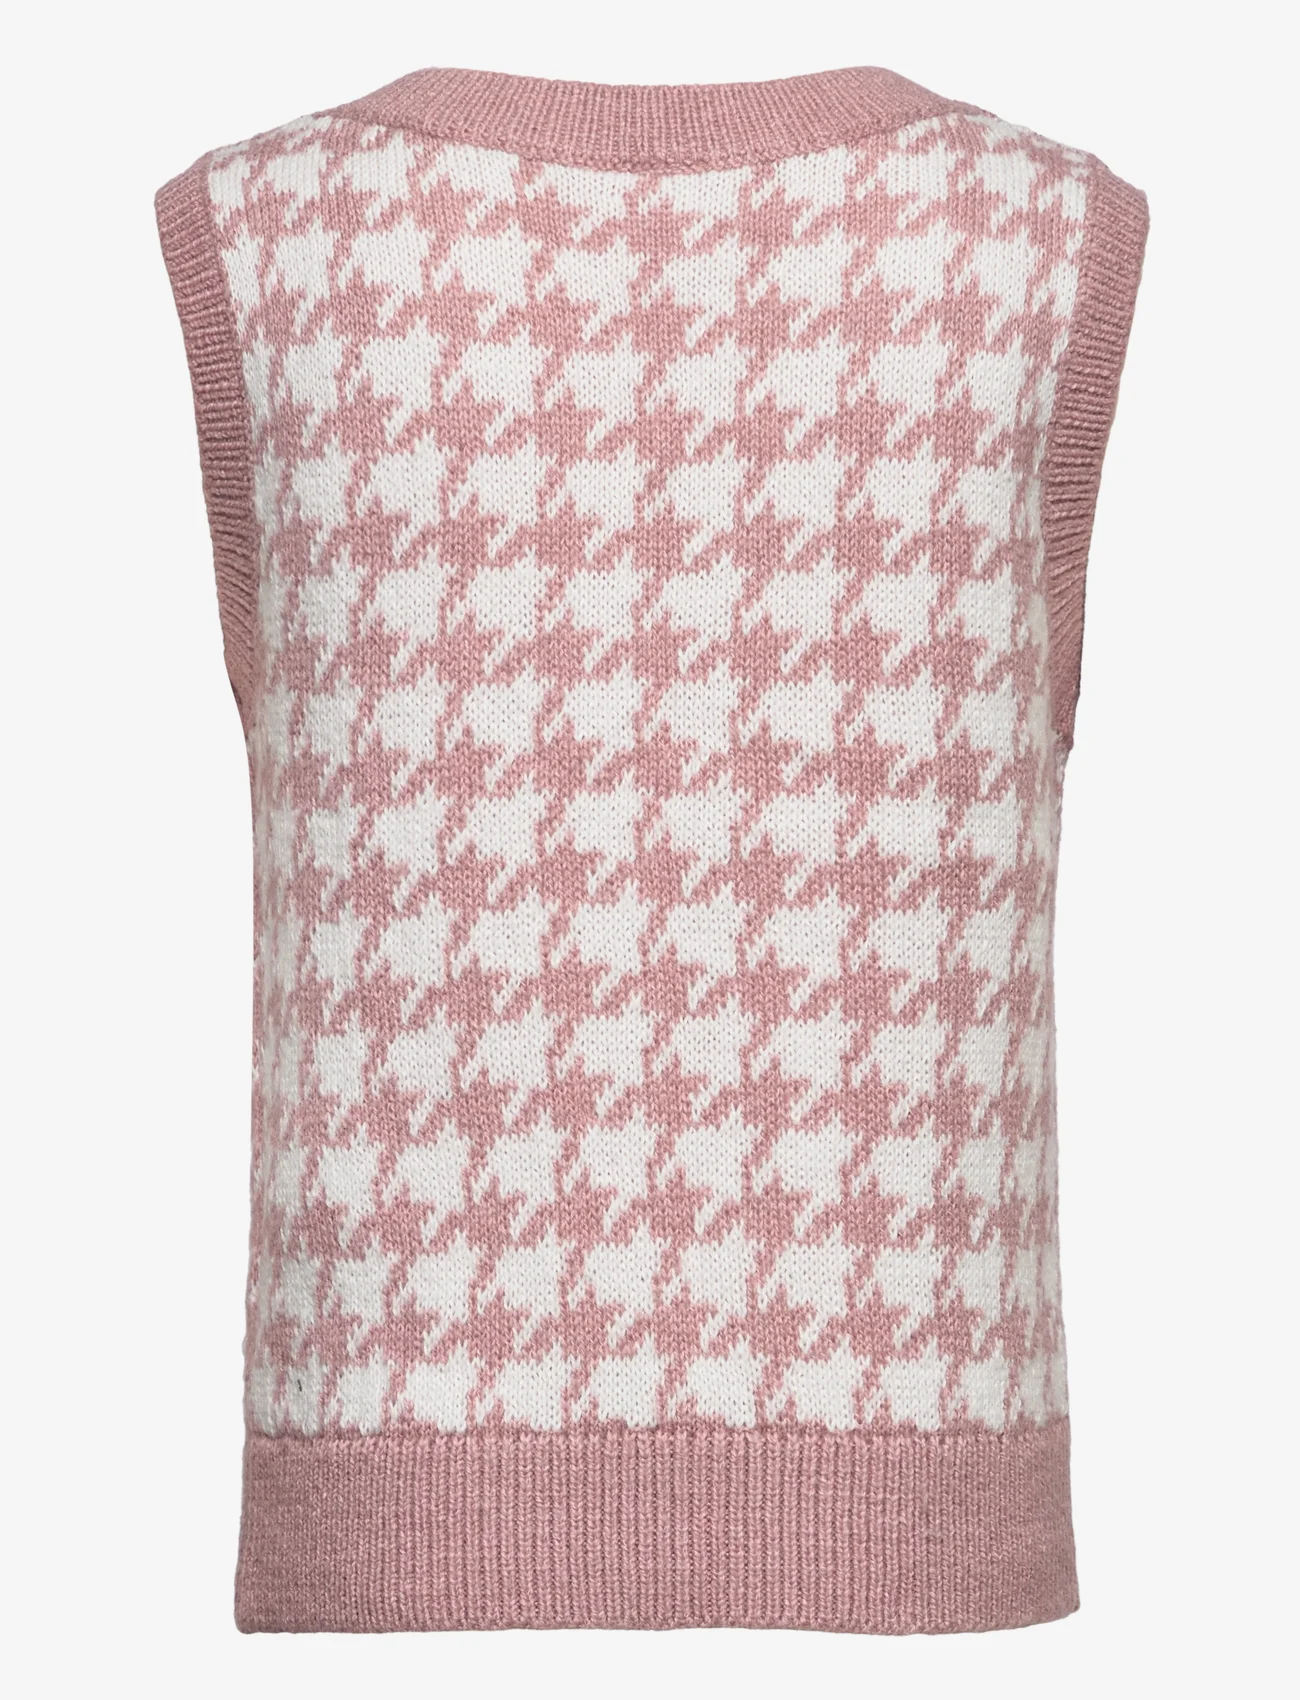 Abercrombie & Fitch - kids GIRLS SWEATERS - de laveste prisene - pink and white - 1